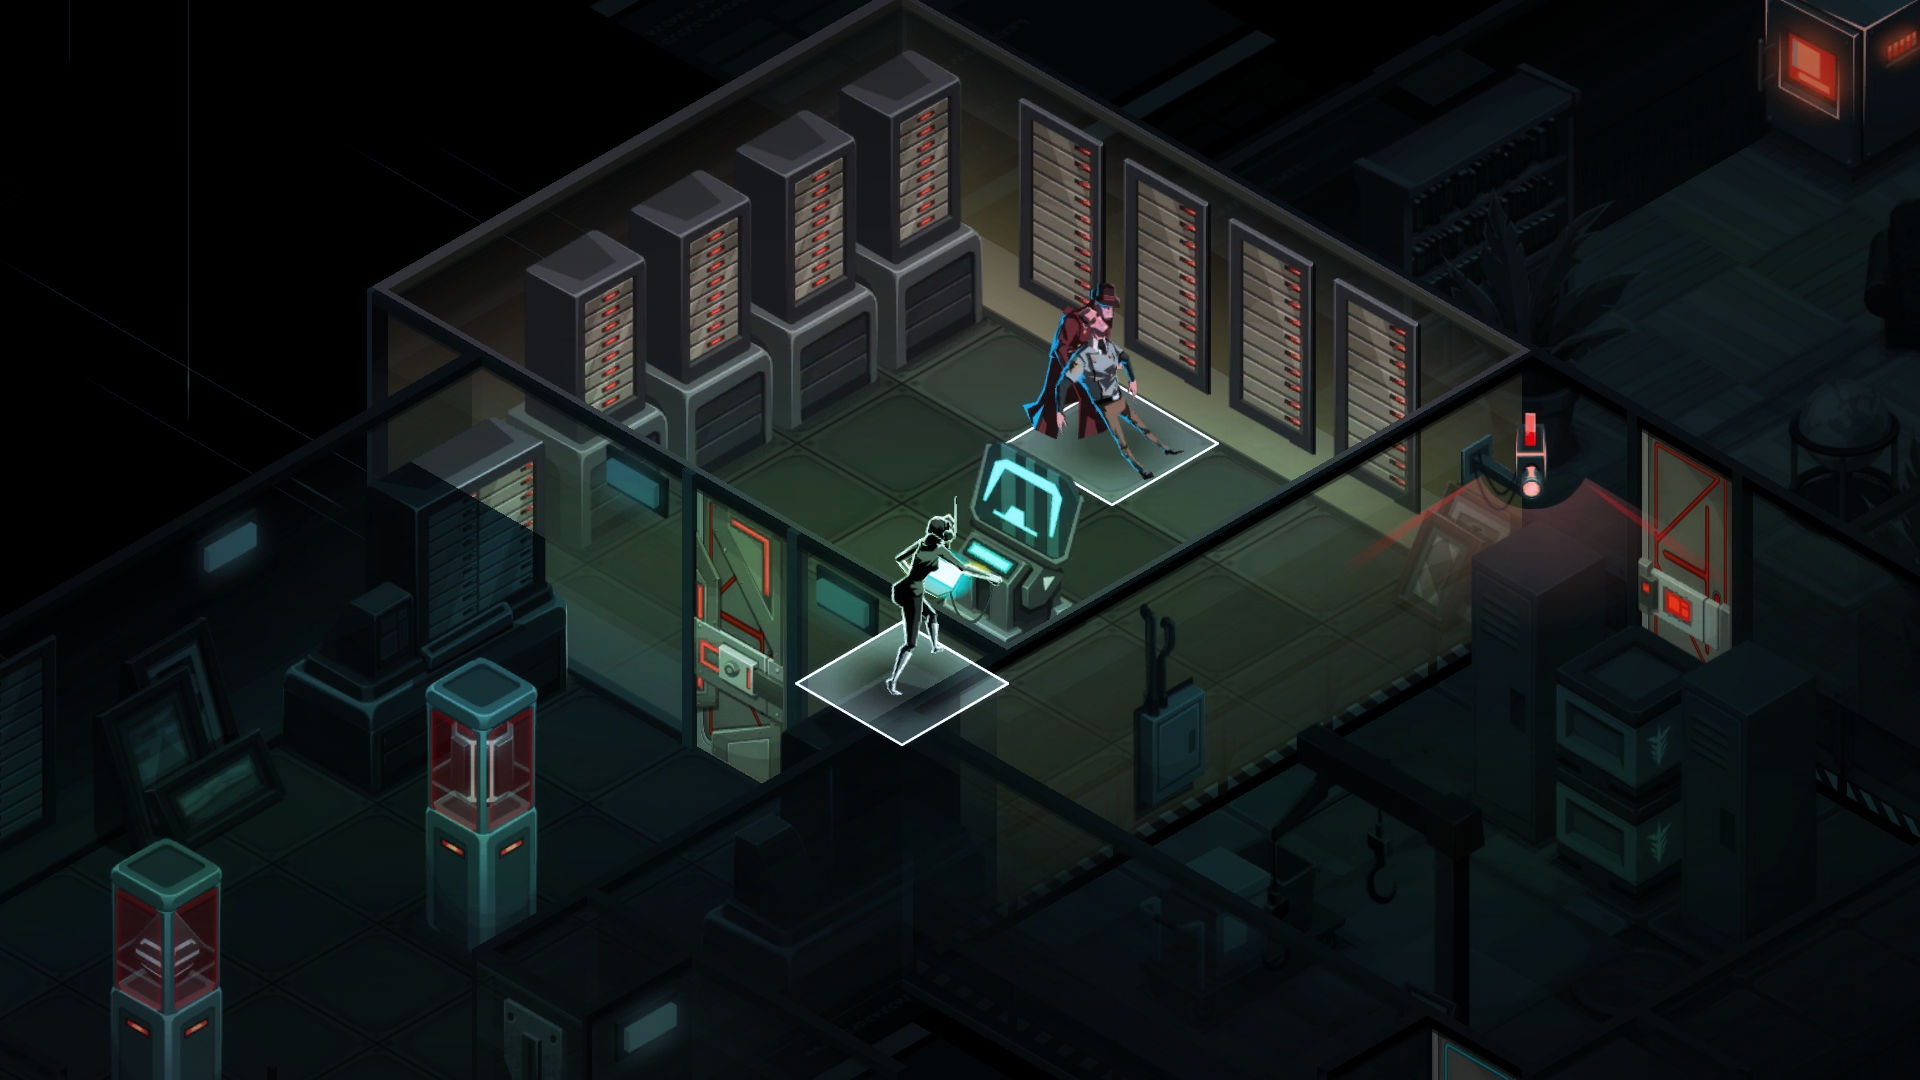 download invisible inc ps4 for free